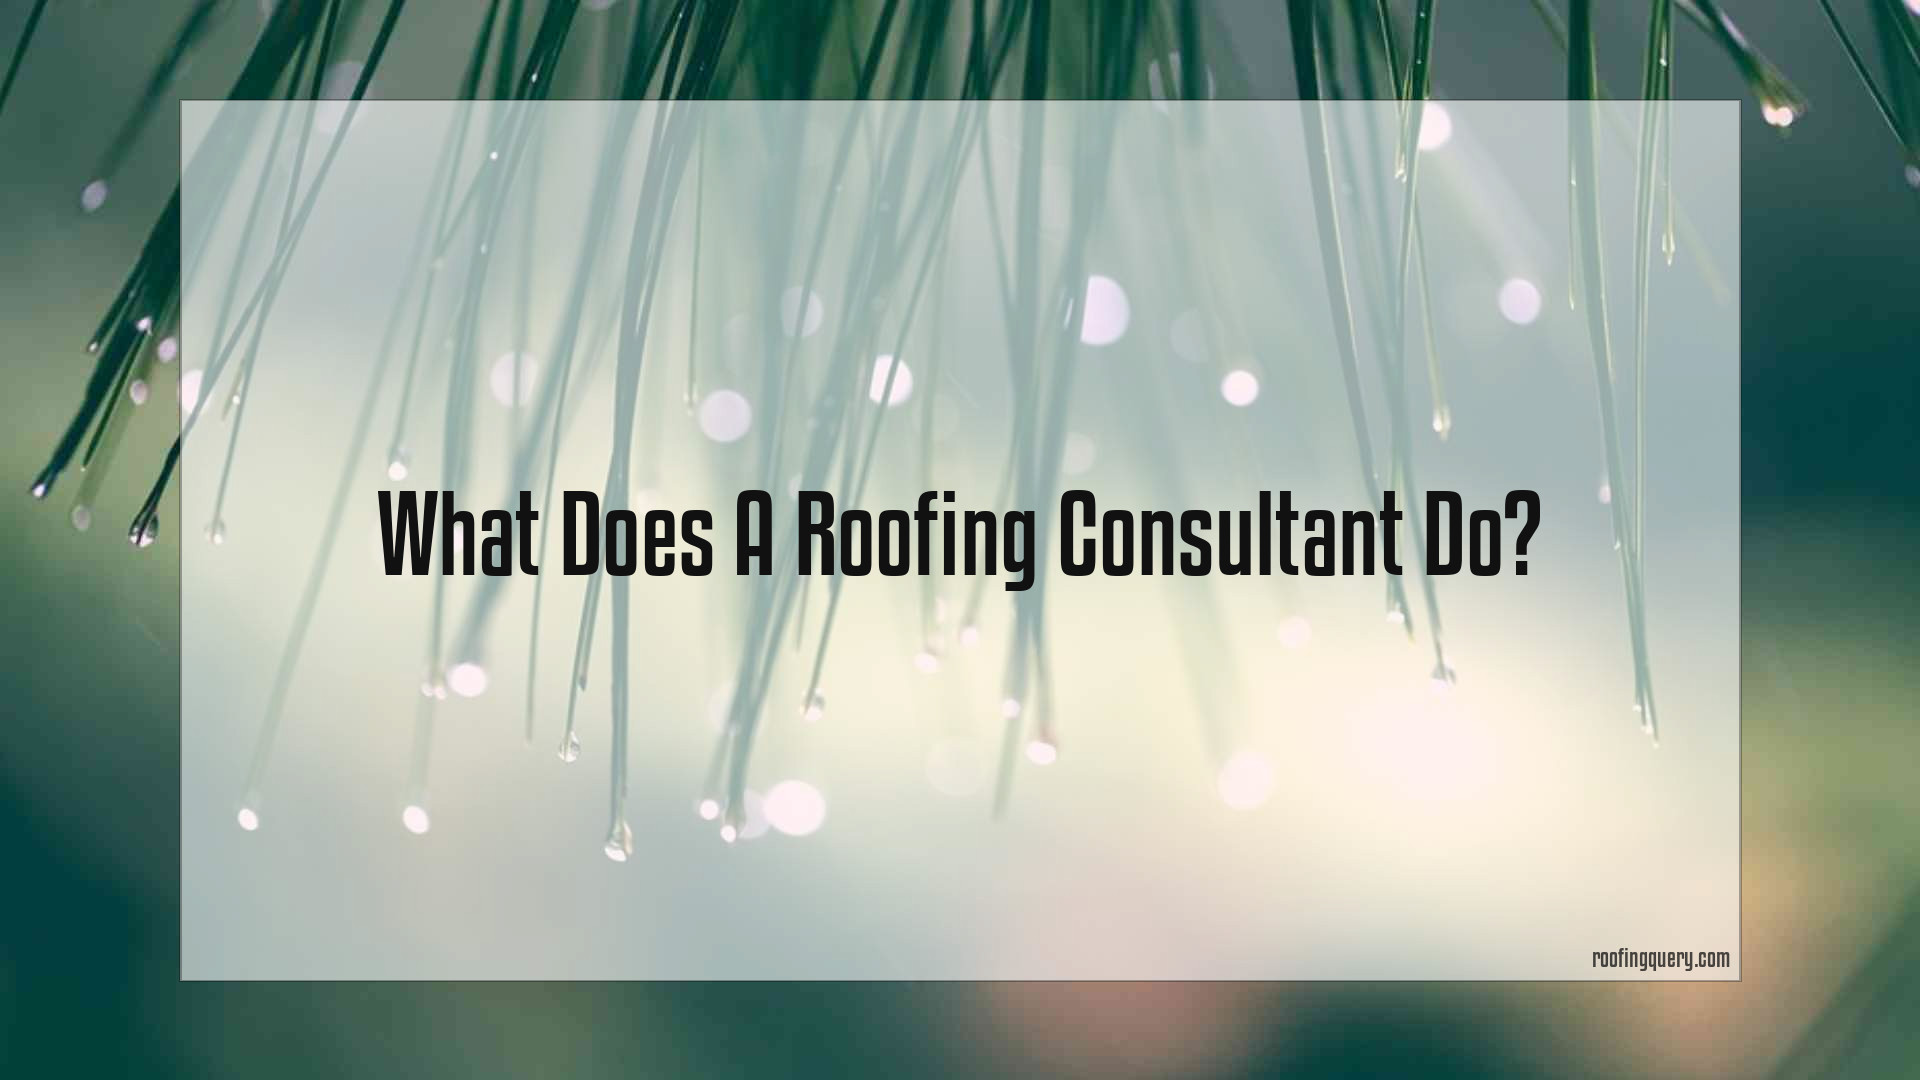 What Does A Roofing Consultant Do